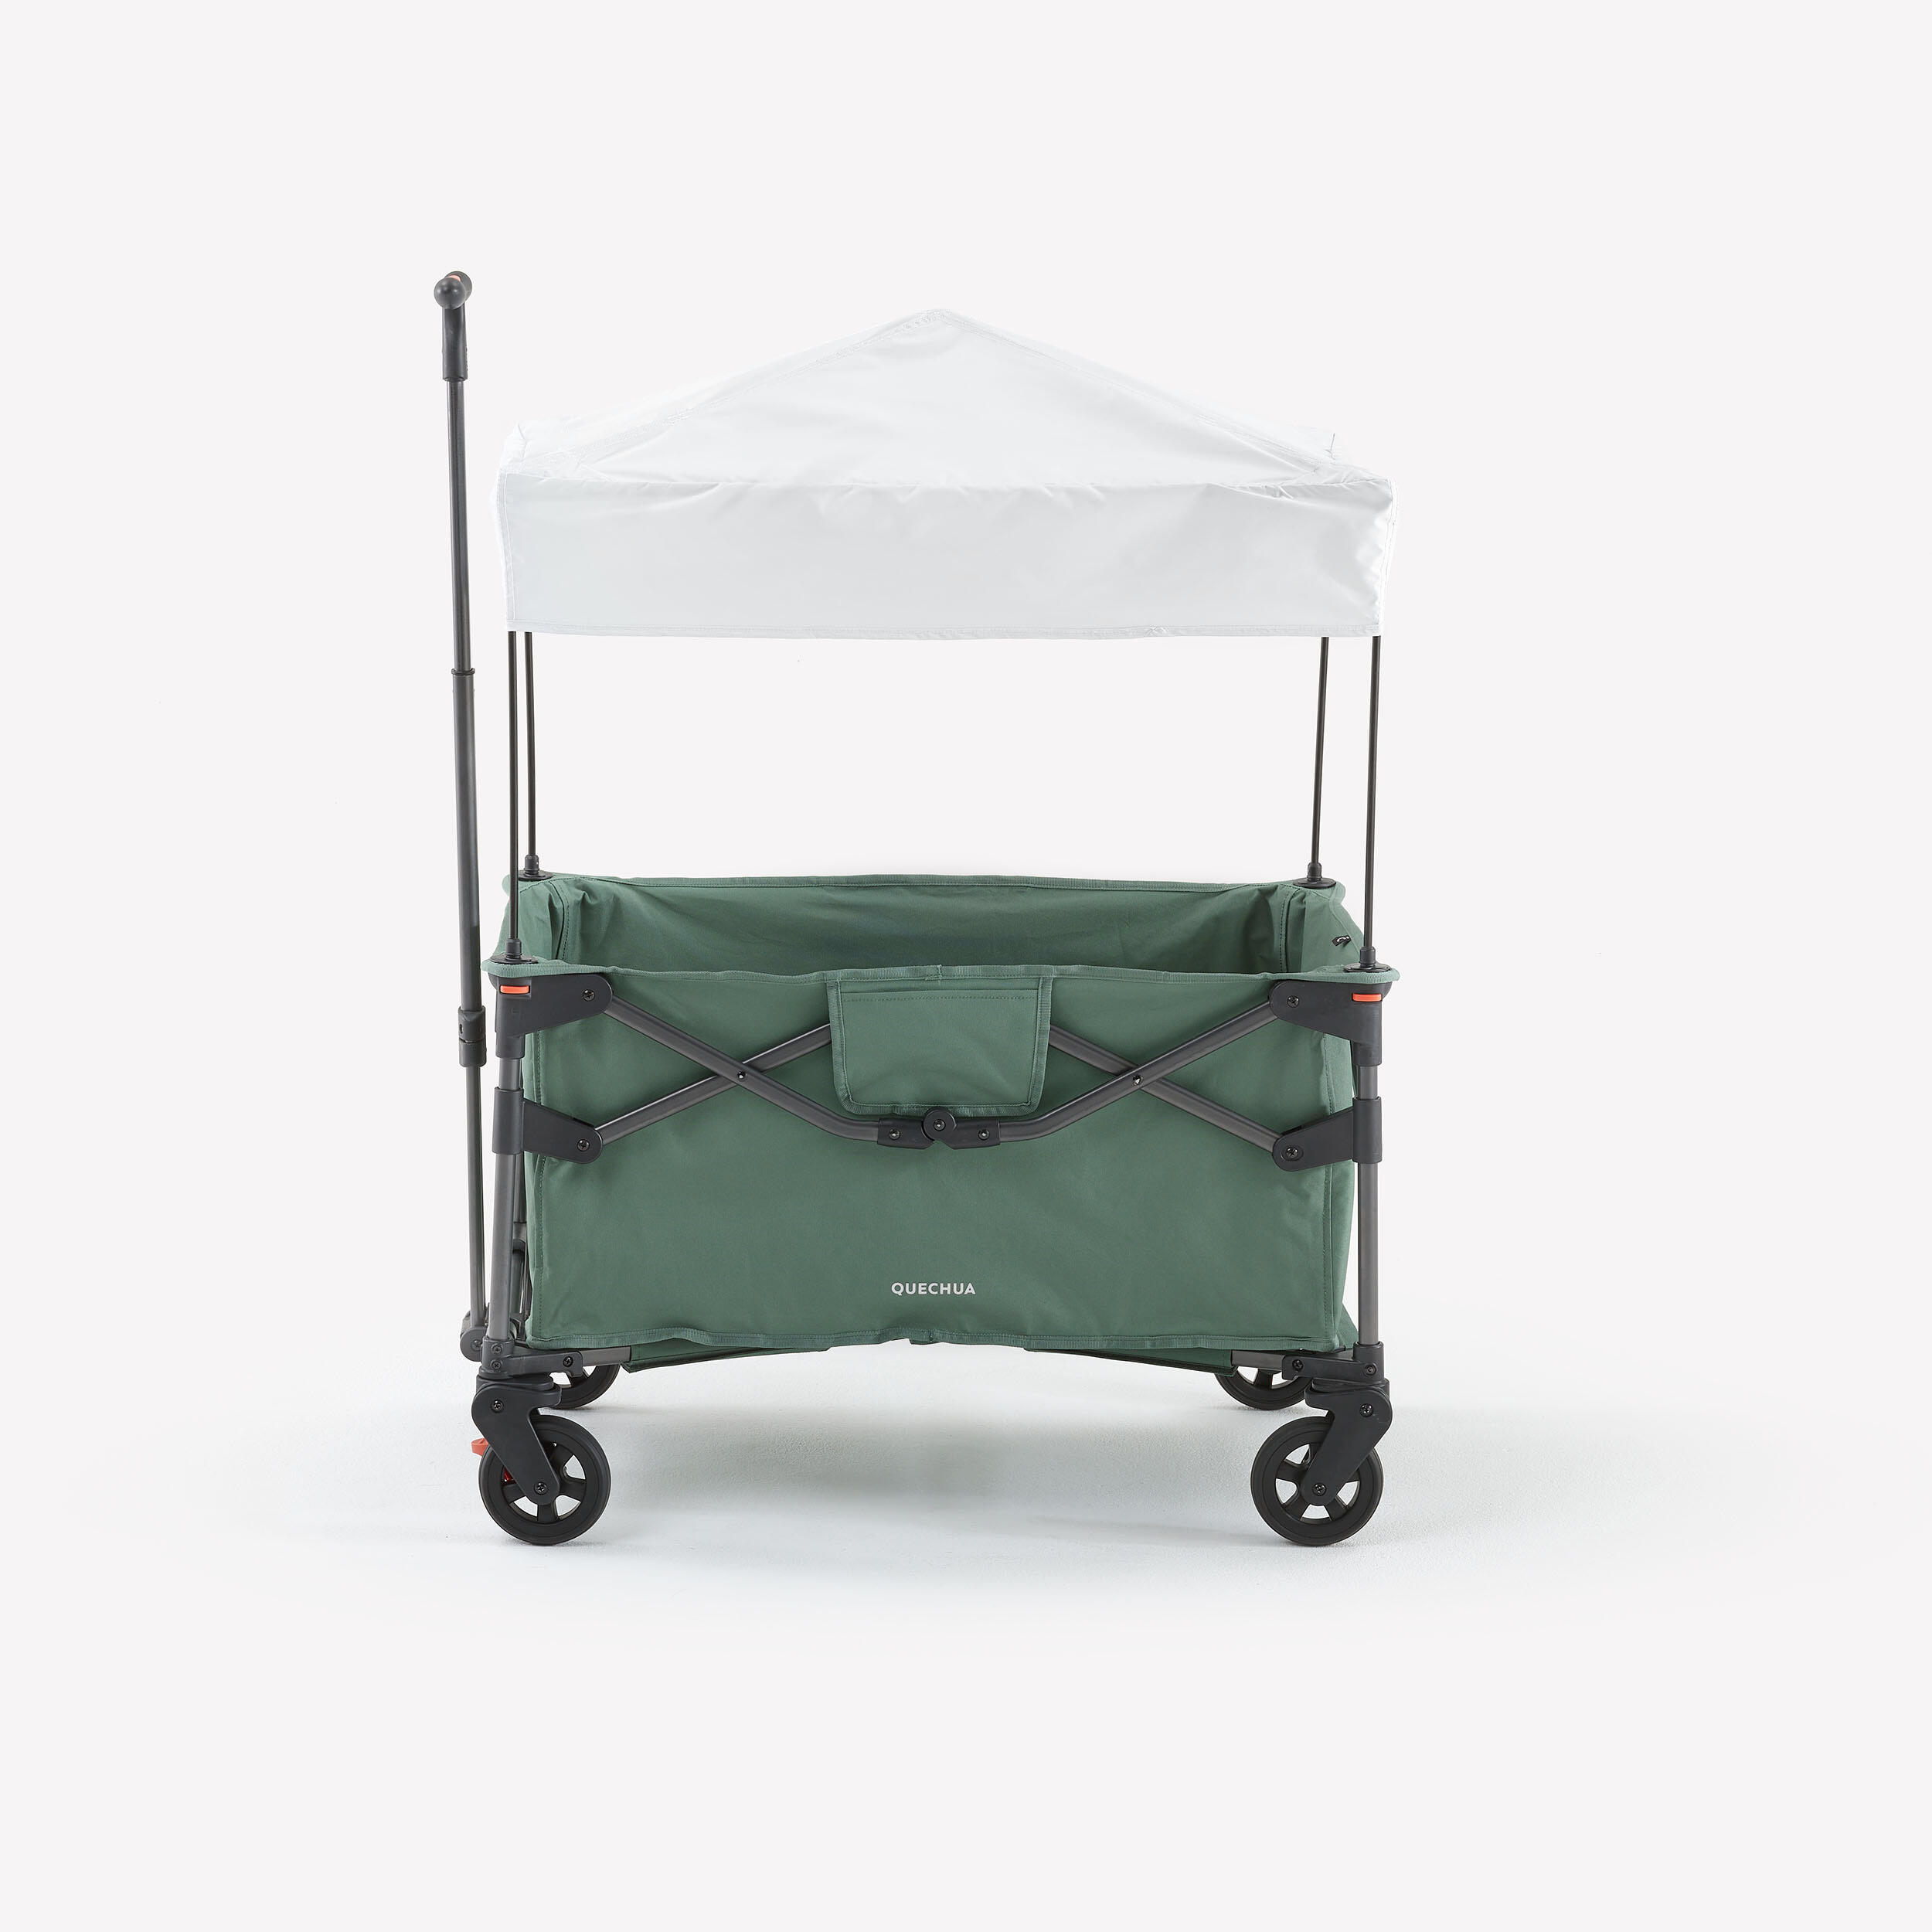 QUECHUA COMPACT TROLLEY FOR TRANSPORTING CAMPING EQUIPMENT - ULTRA-COMPACT TROLLEY